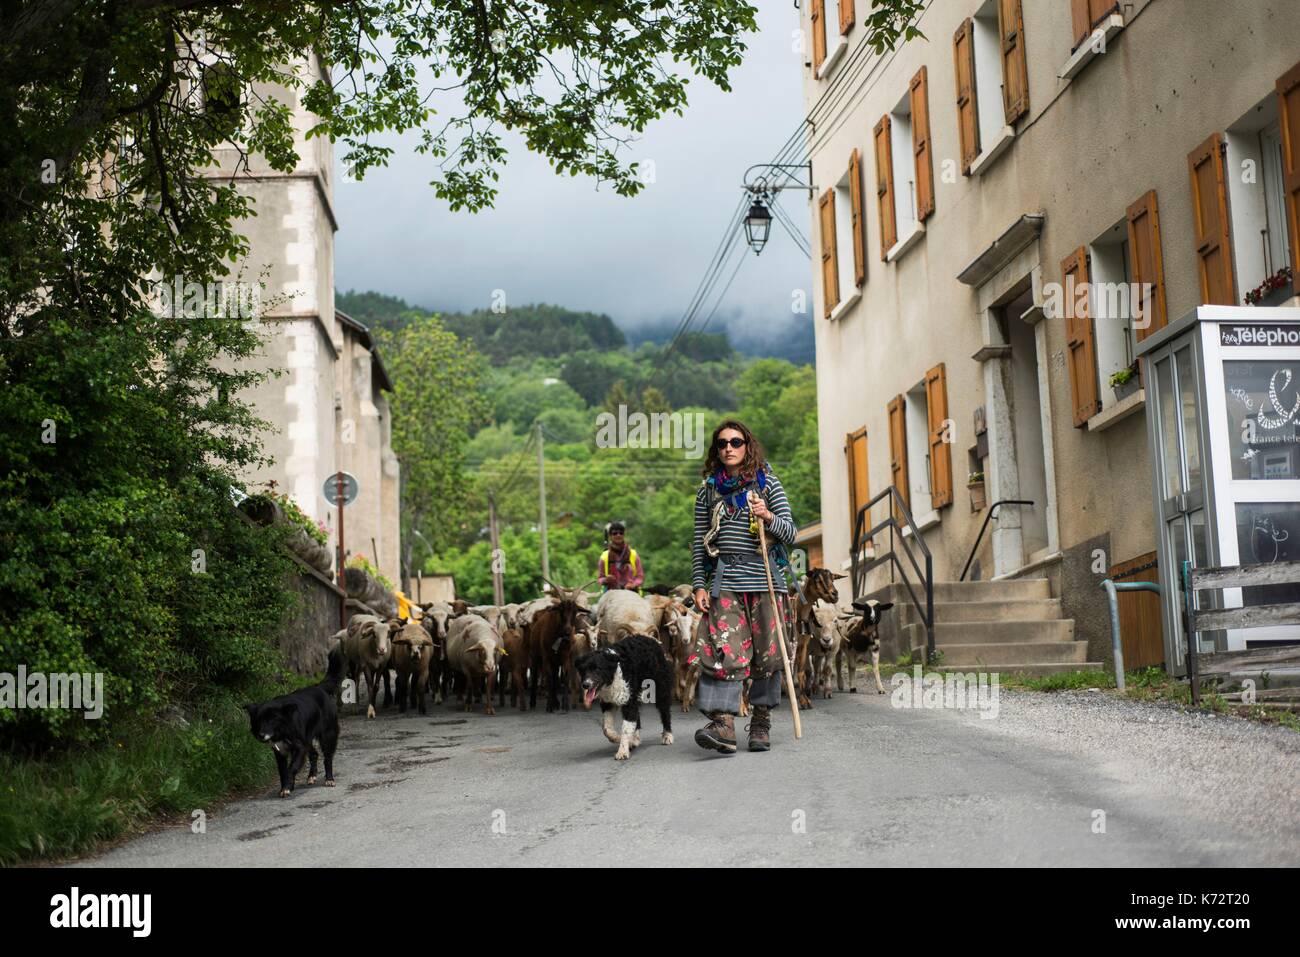 France Hautes Alpes, Chateauroux les Alpes, Ecrins national Park, Durance valley, transhumance on foot, through the village Stock Photo